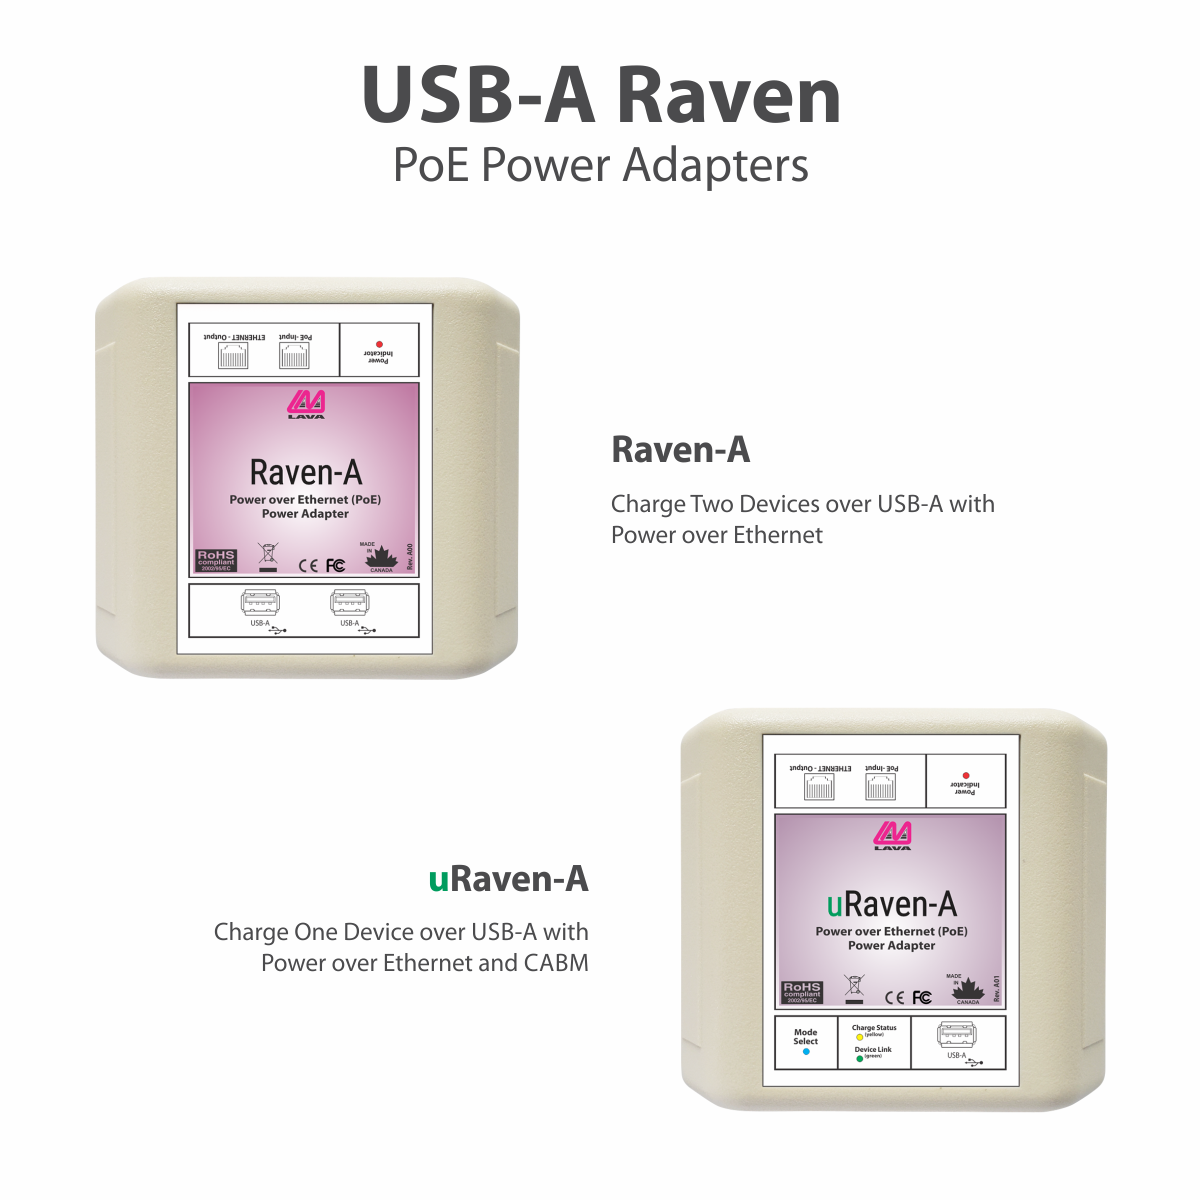 Raven-A and uRaven-A PoE Power Adapters